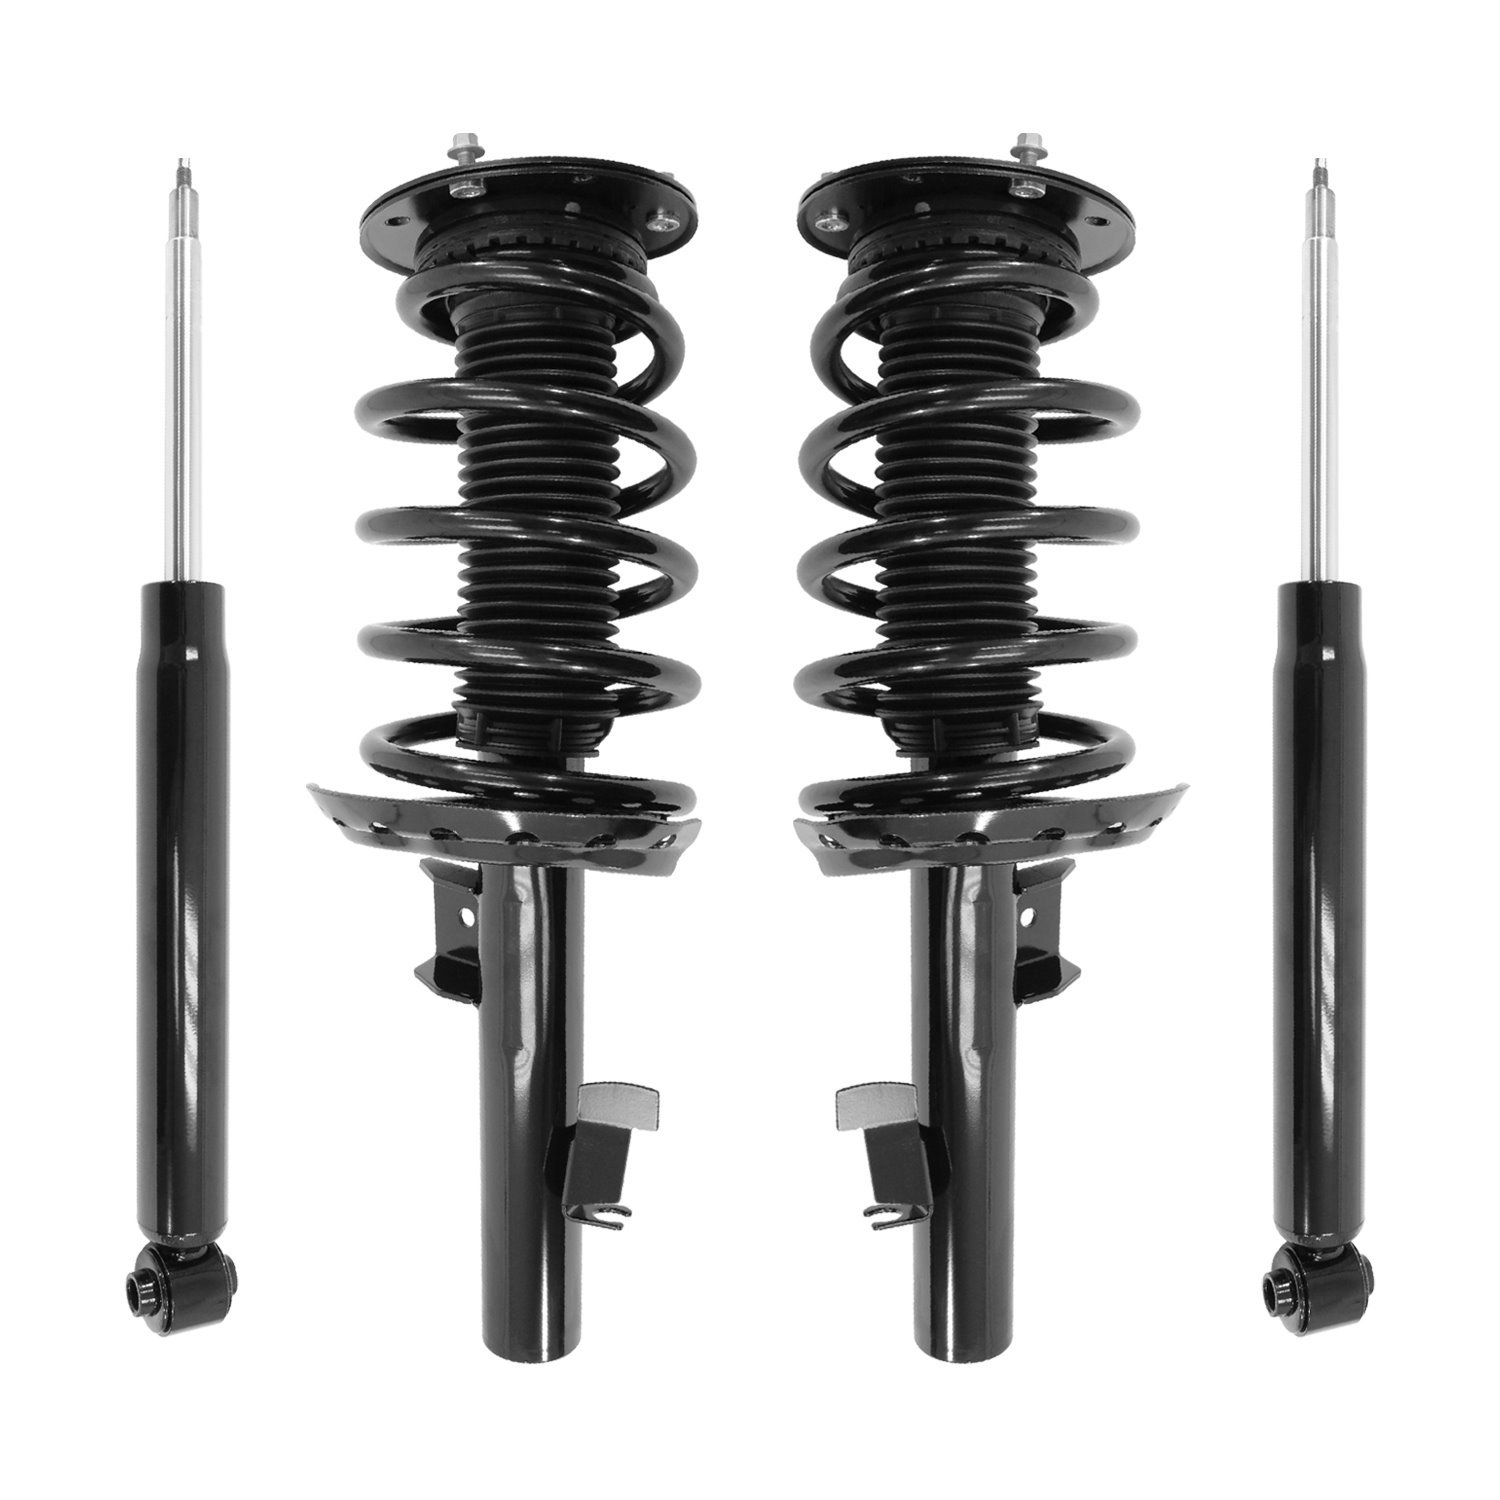 4-13301-257200-001 Front & Rear Complete Strut Assembly Shock Absorber Kit Fits Select Volvo XC60